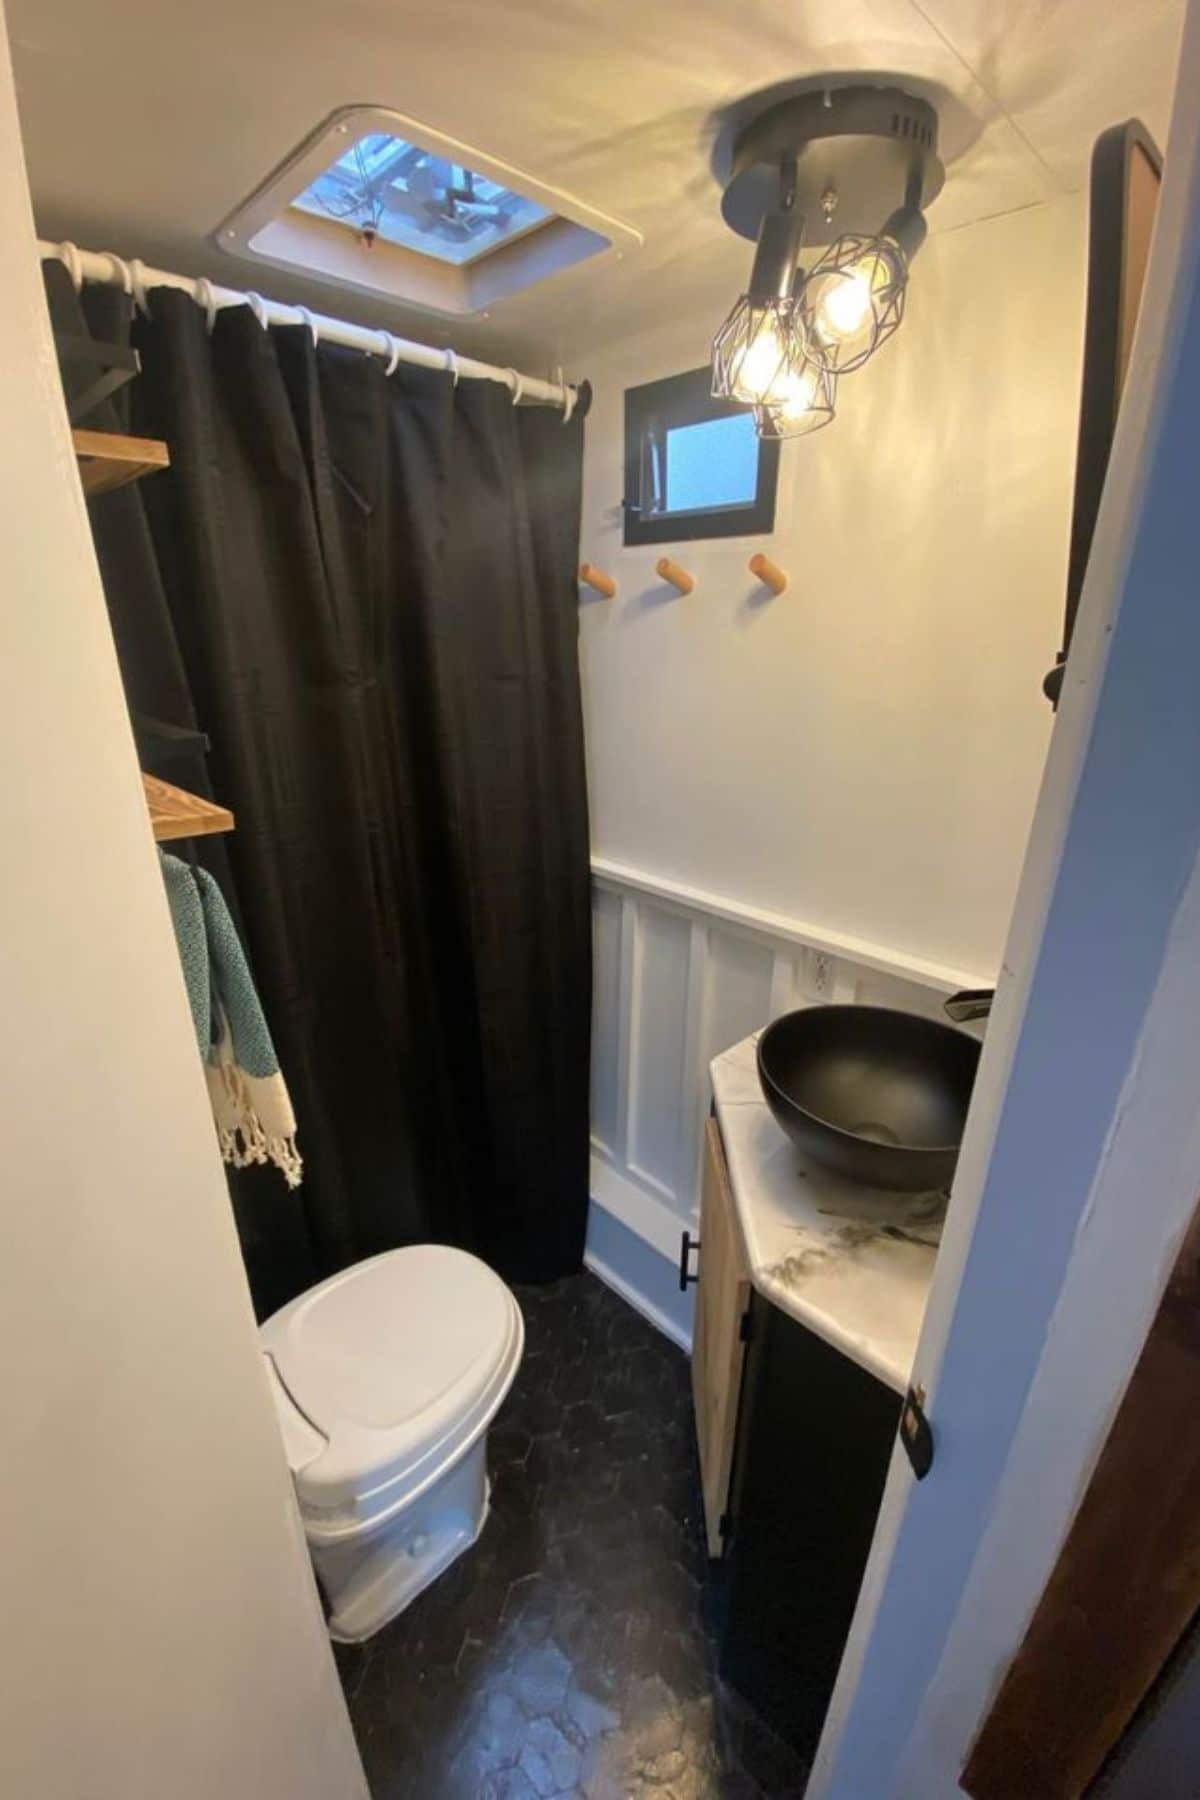 Shower with black curtain and compost toilet next to small black bowl sink